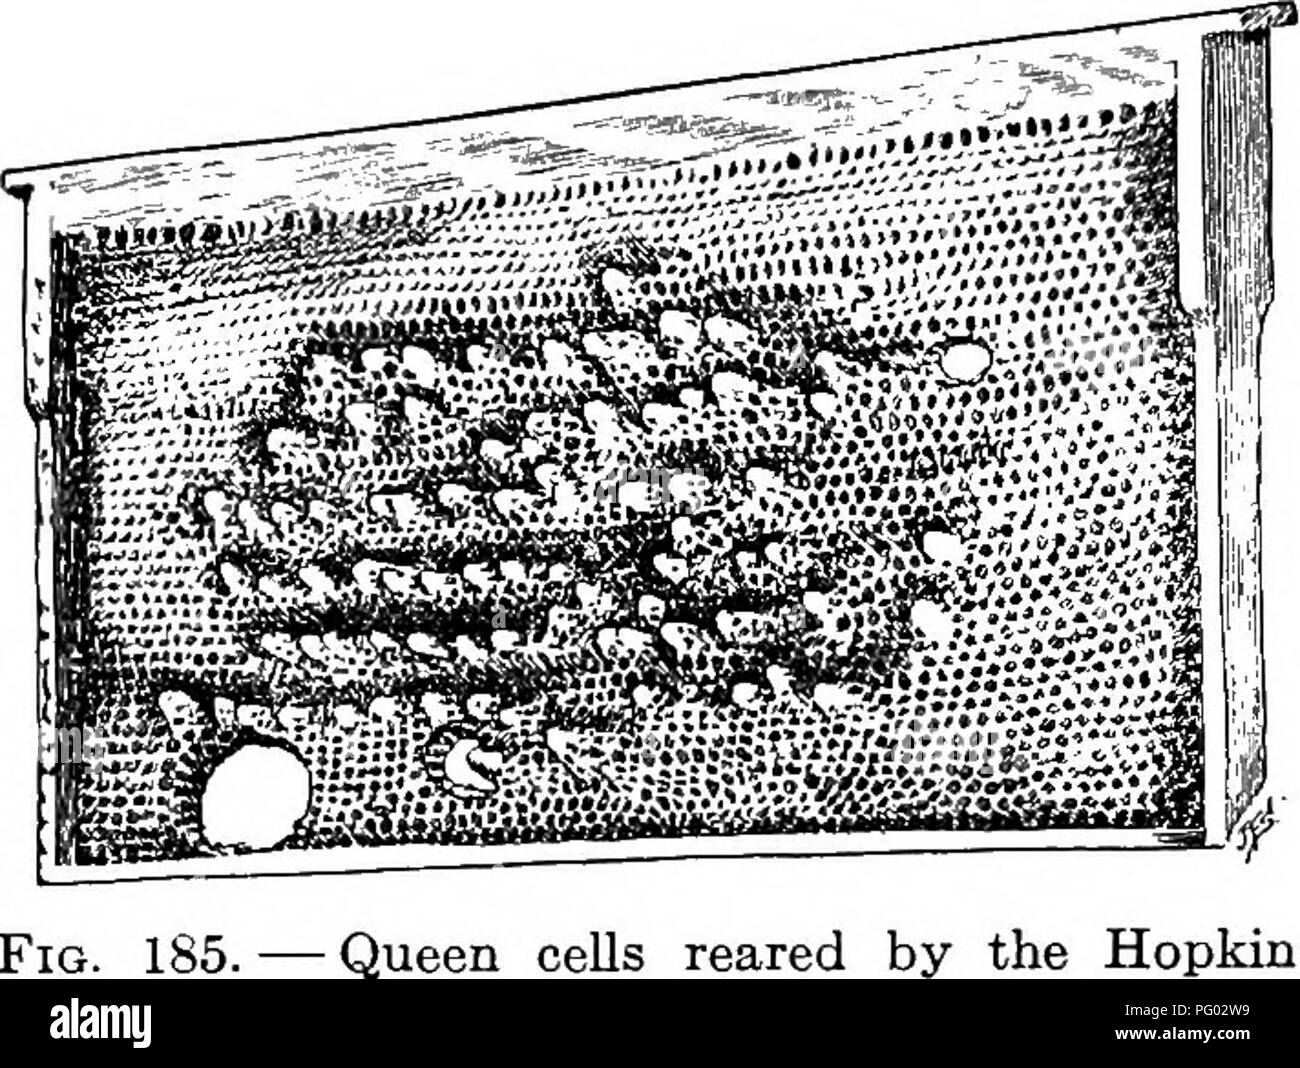 . Beekeeping; a discussion of the life of the honeybee and of the production of honey. Bees; Honey. The Rearing of Queens 421 moved. The workers remodel the cells which contain the eggs, making them into queen cells. The Hopkins method. — Another method has recently been recommended by Hopkins' for getting queen cells in quan- tity. A new comb is given to a breeding queen to be filled with eggs, after which it is removed, and with a sharp knife three out of every four rows of cells across the comb are cut away to the midrib, leaving every fourth row intact. Two of every three eggs are then des Stock Photo